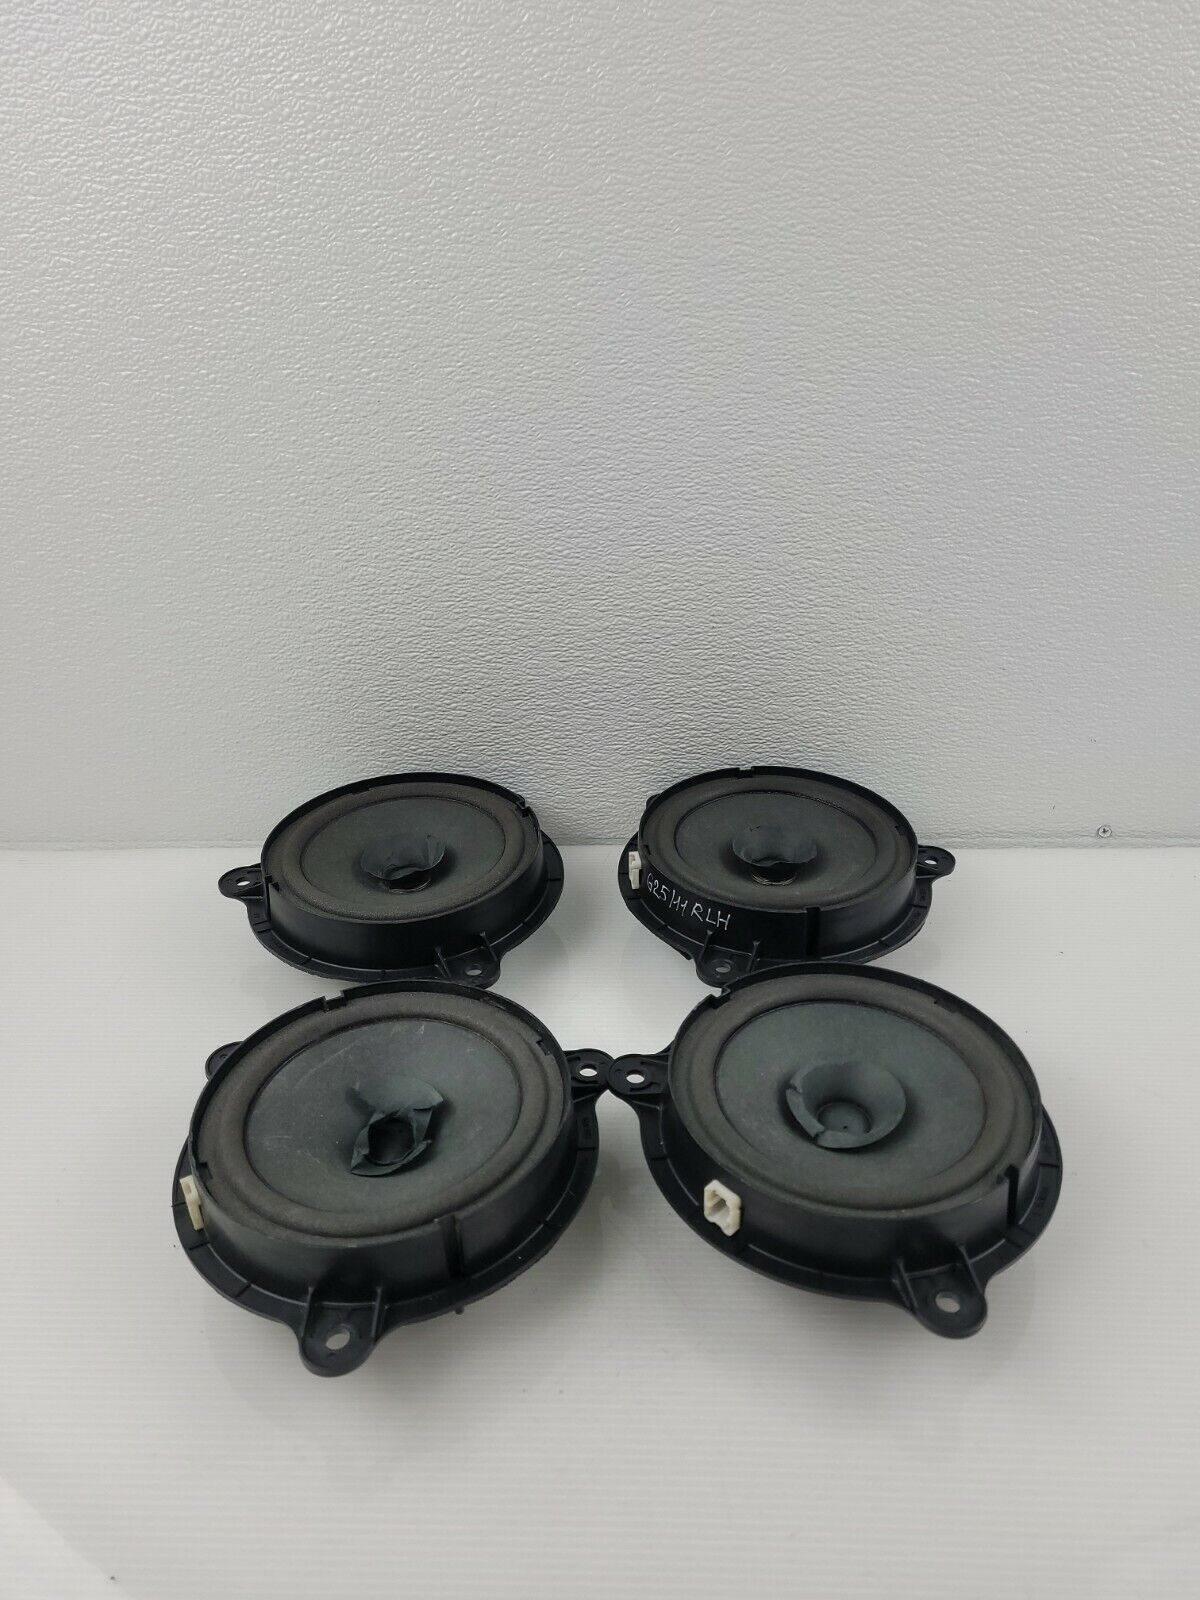 2010 - 2013 INFINITI G37 G25 SPEAKER SET OF 4 FRONT AND BACK LEFT AND RIGHT OEM 